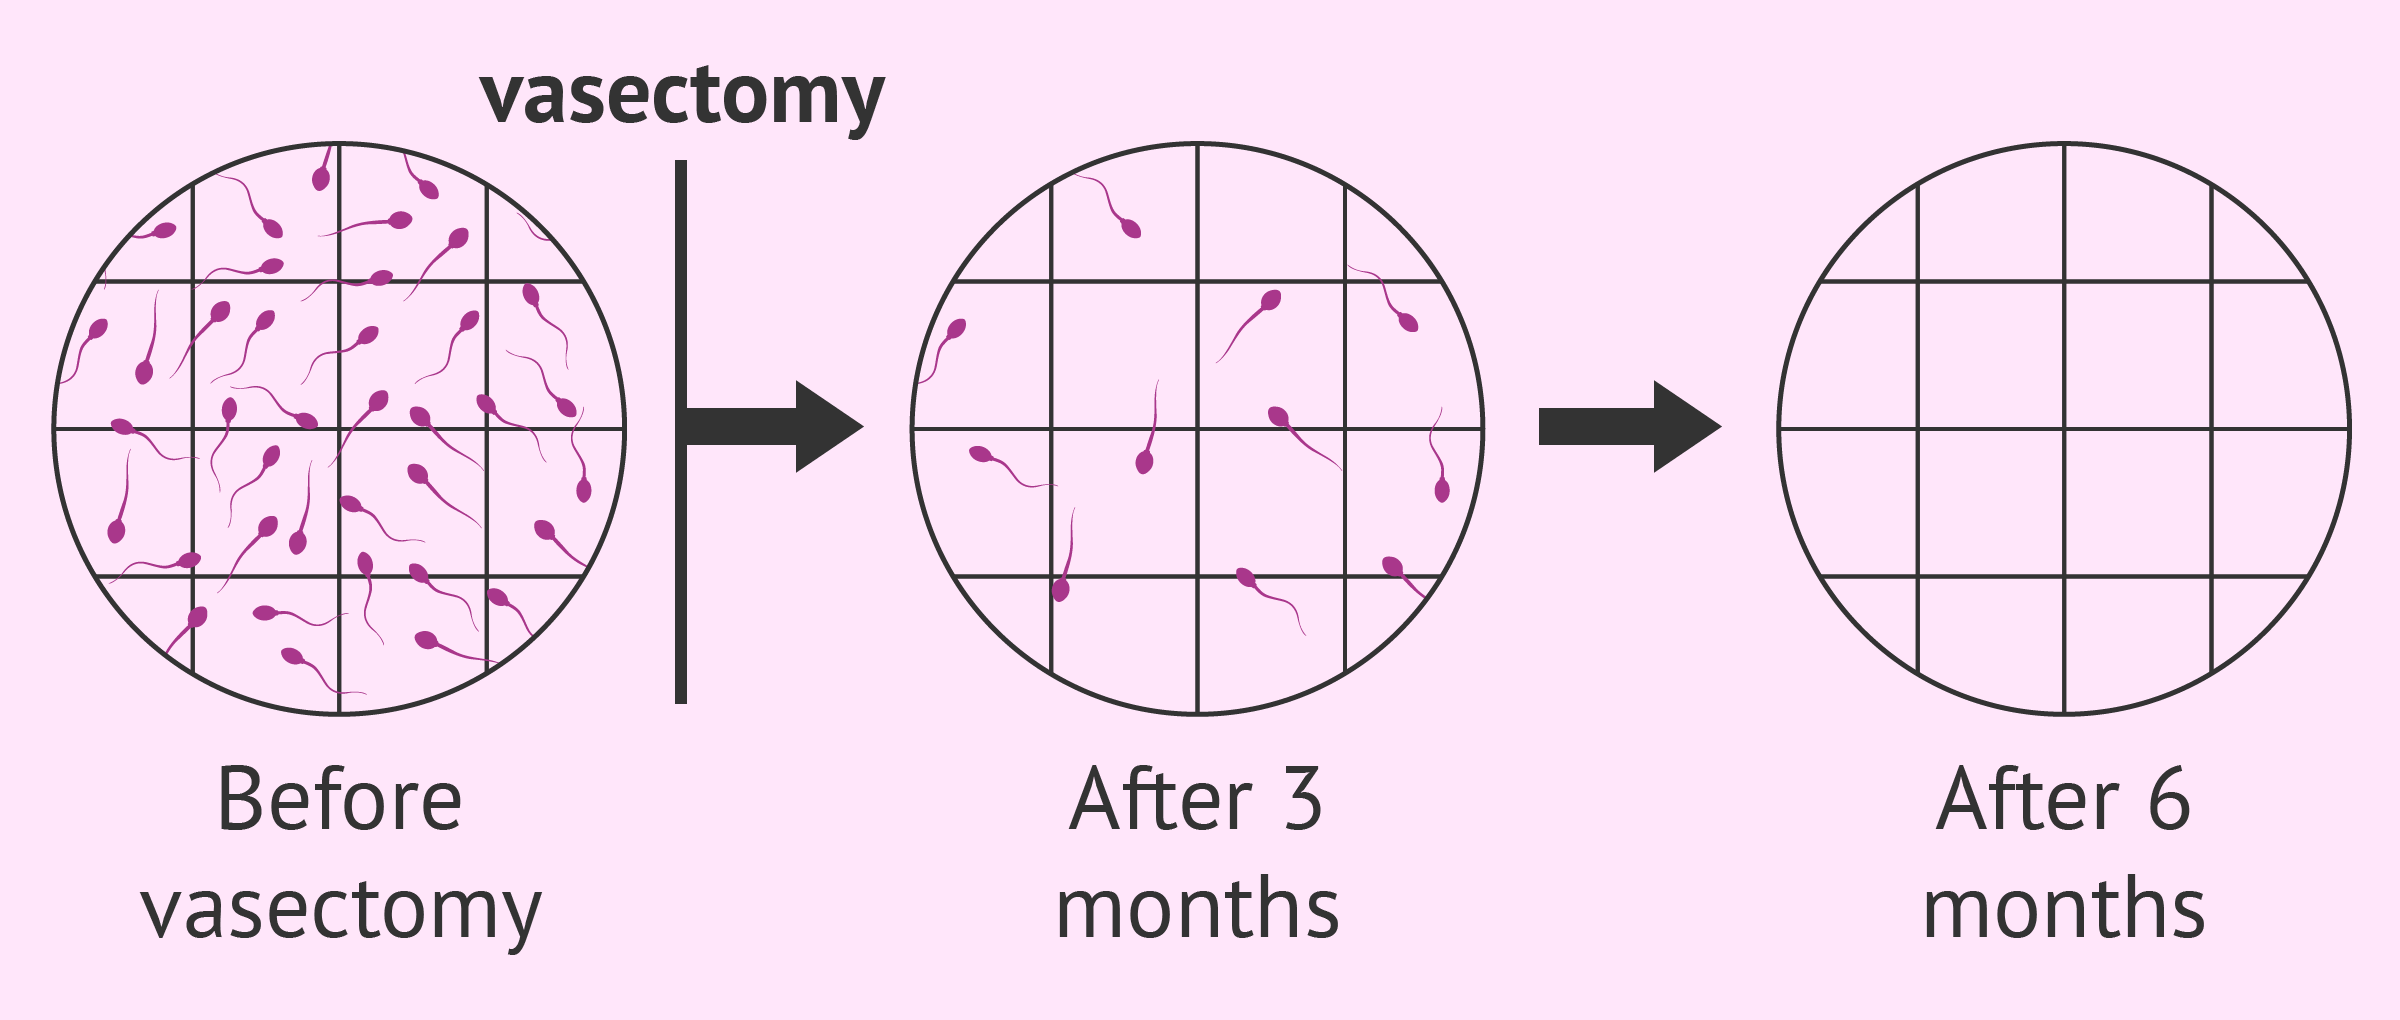 best of Sperm Post production vasectomy